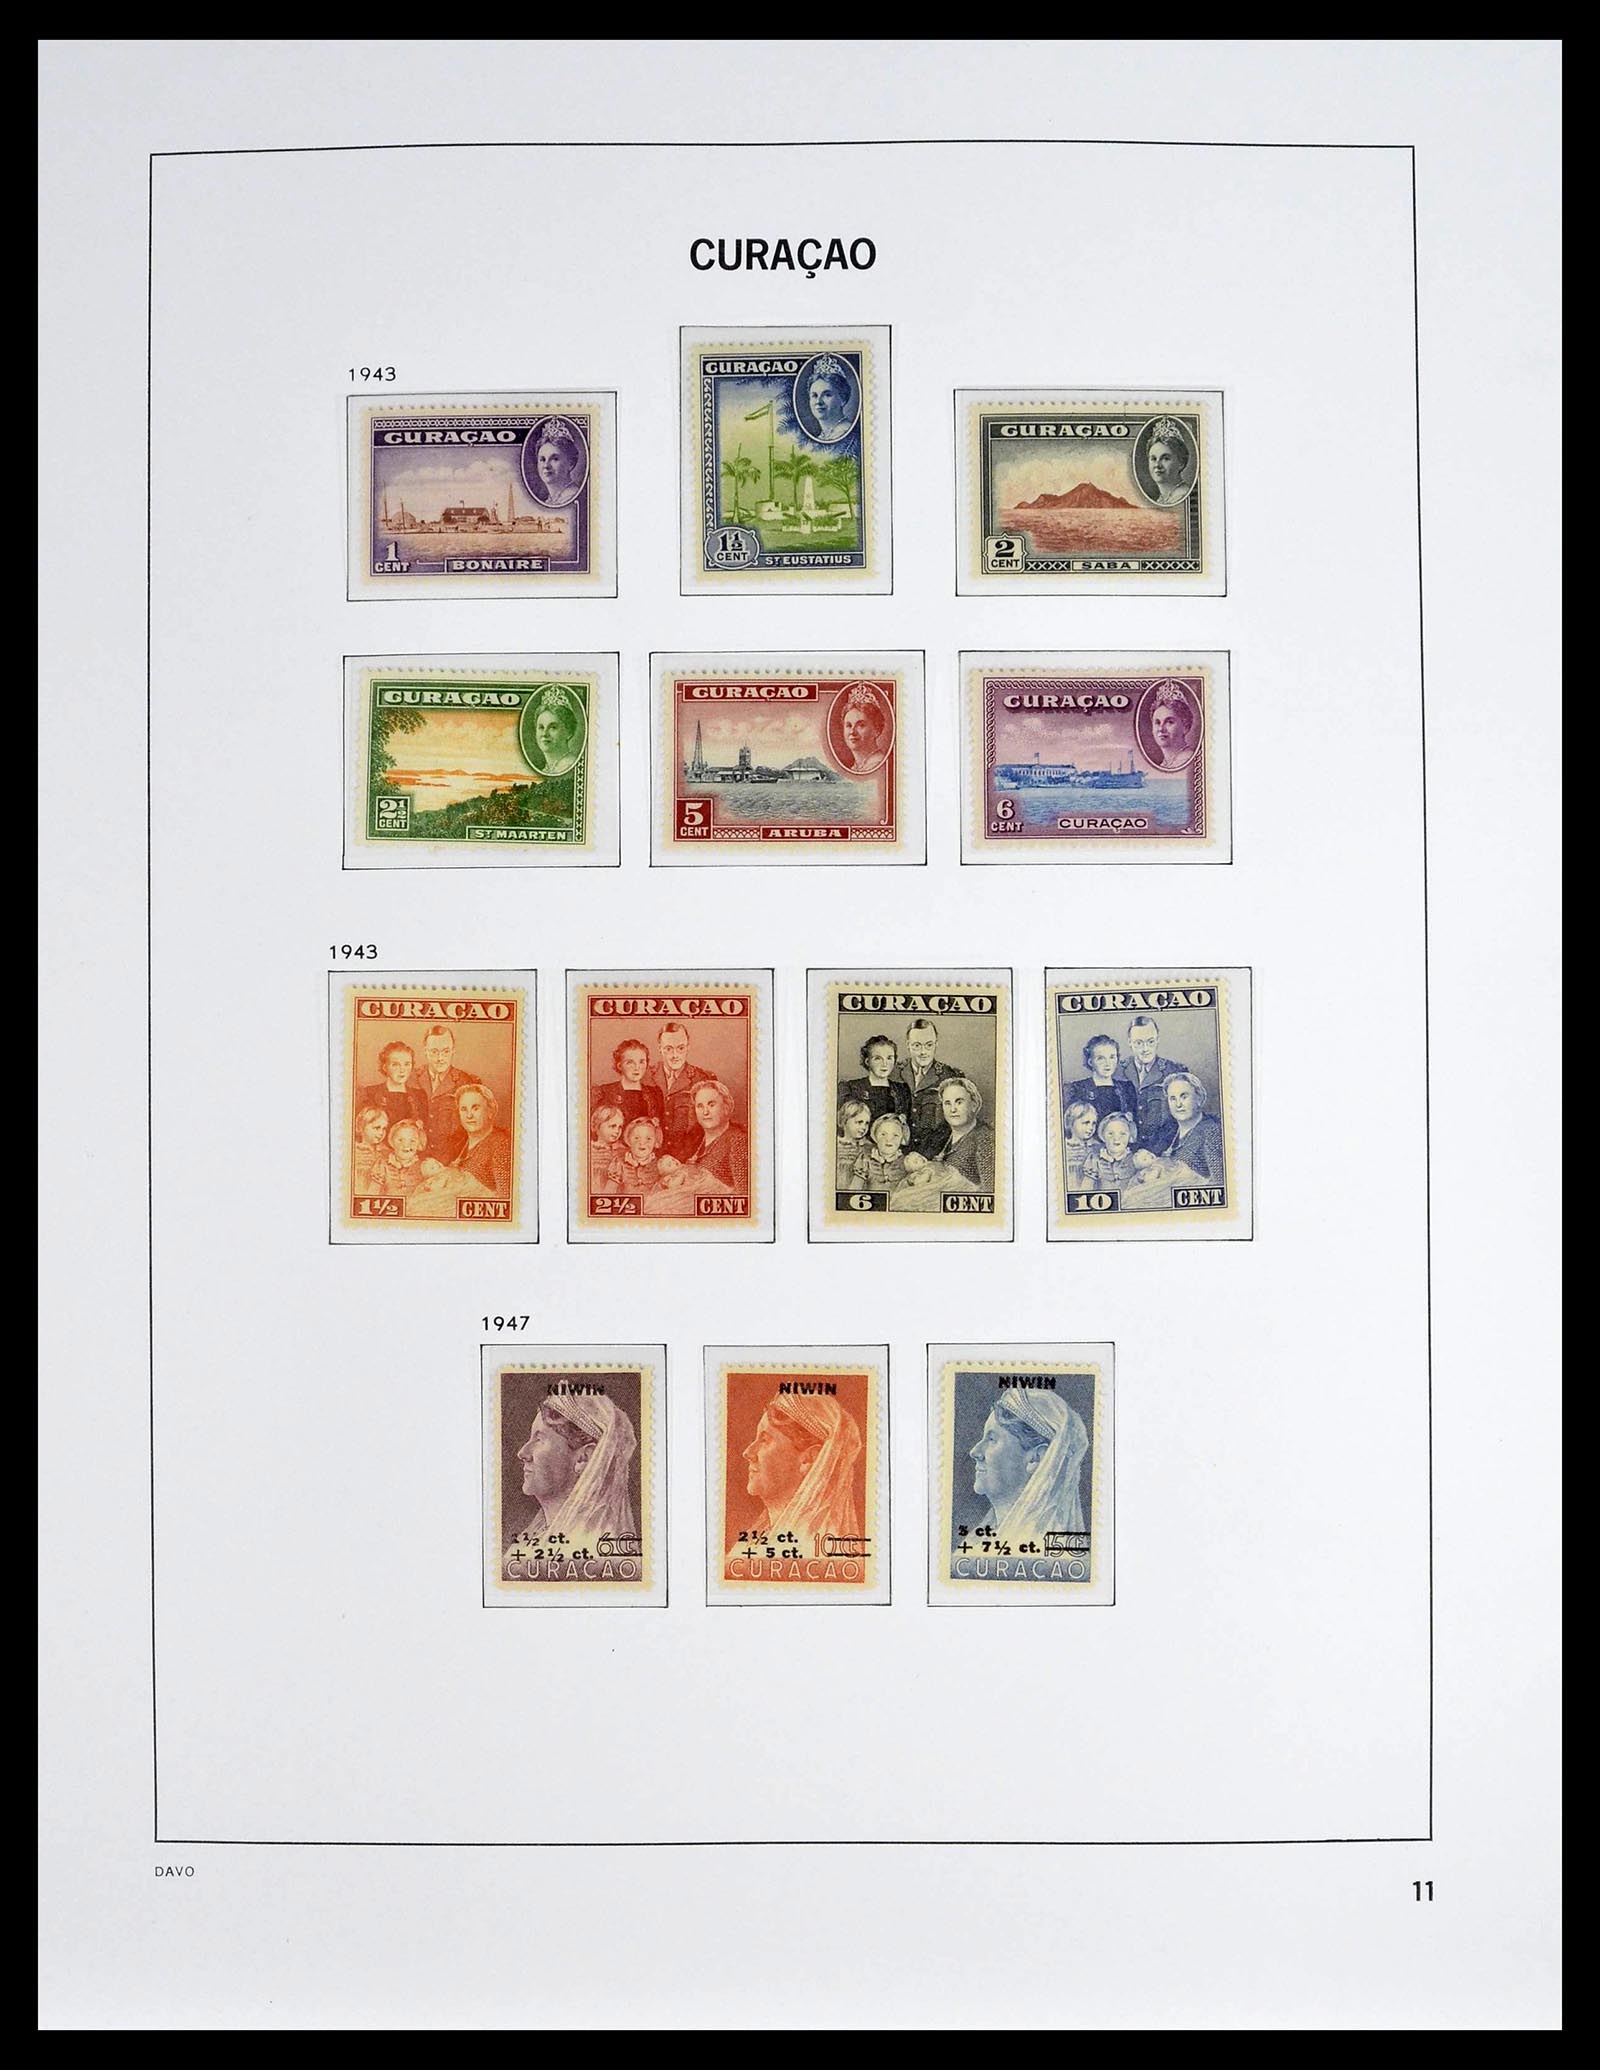 39360 0011 - Stamp collection 39360 Curaçao/Antilles complete 1873-2013.